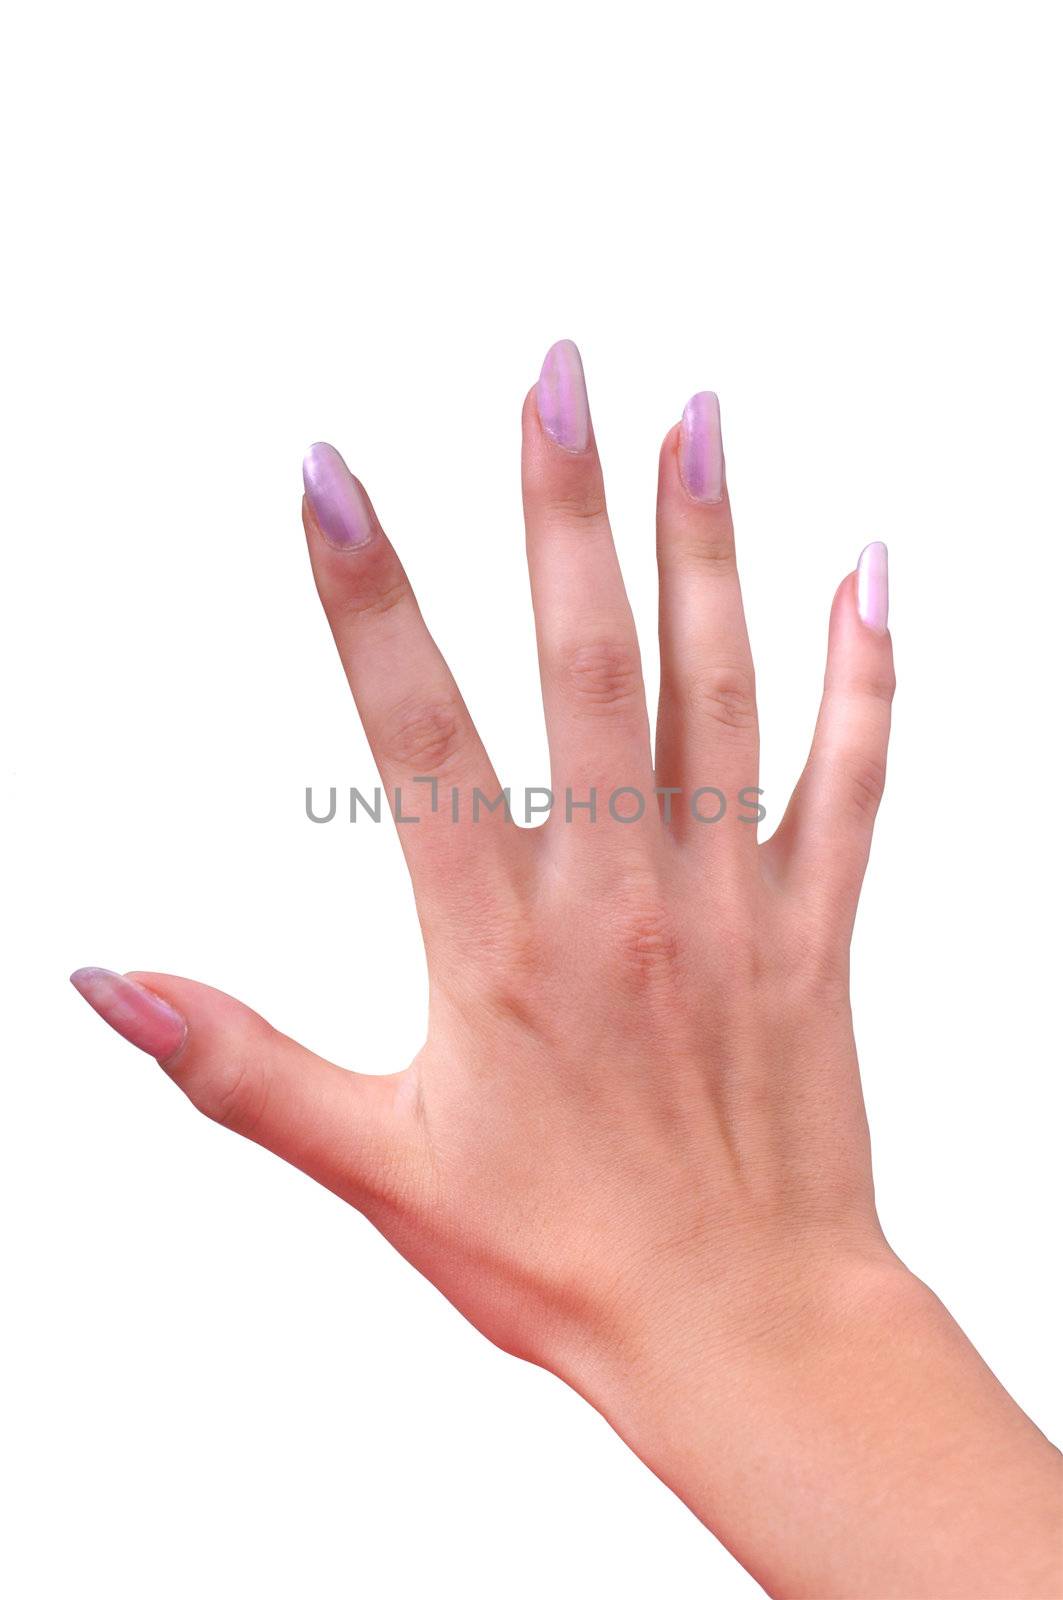 Manicured pink nails